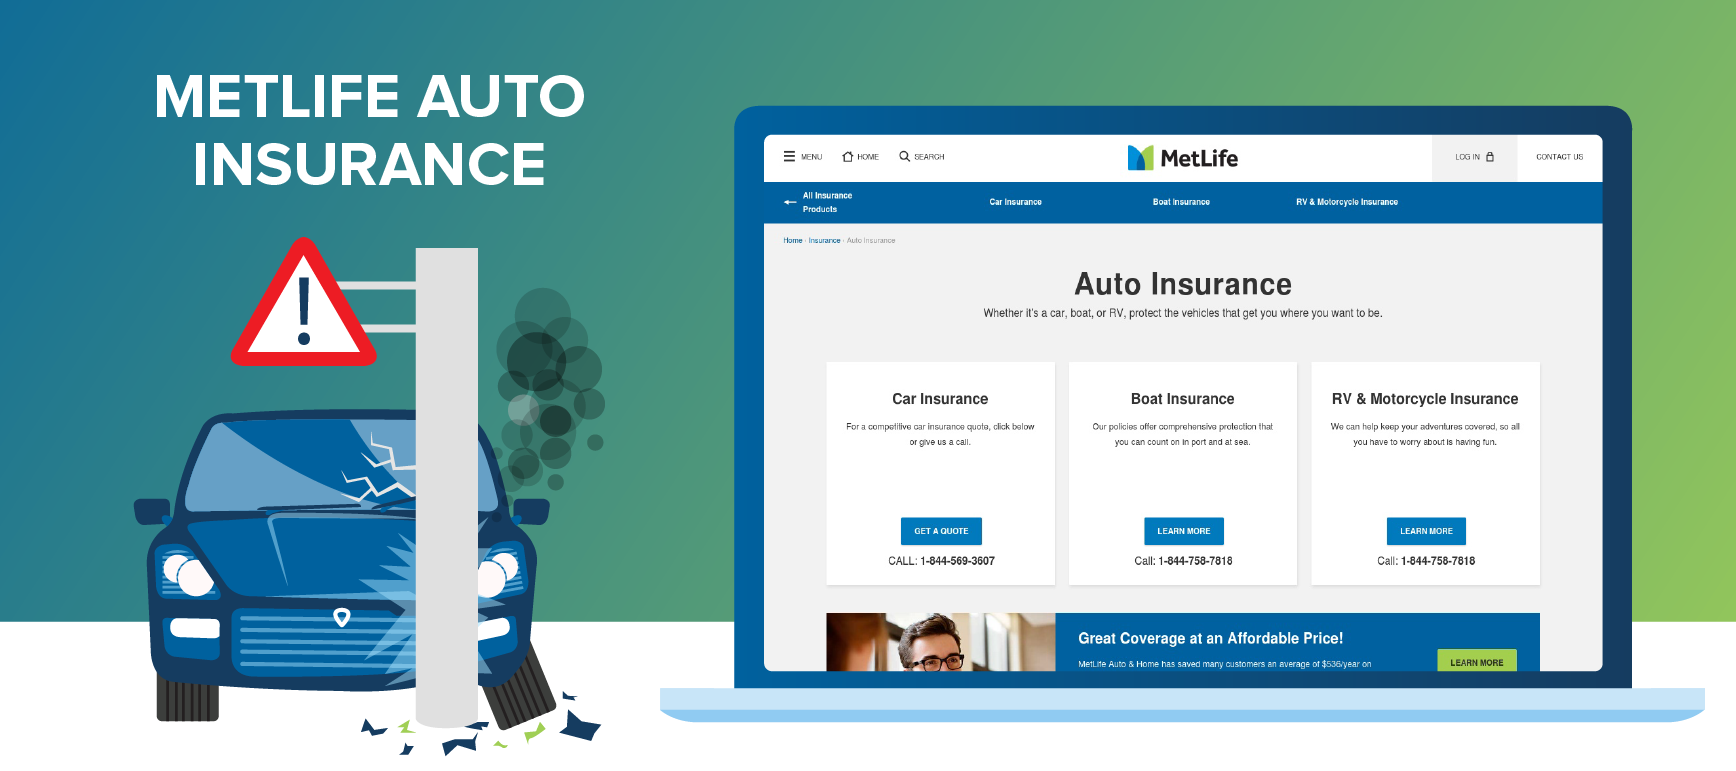 MetLife® Insurance Review - Quote.com®